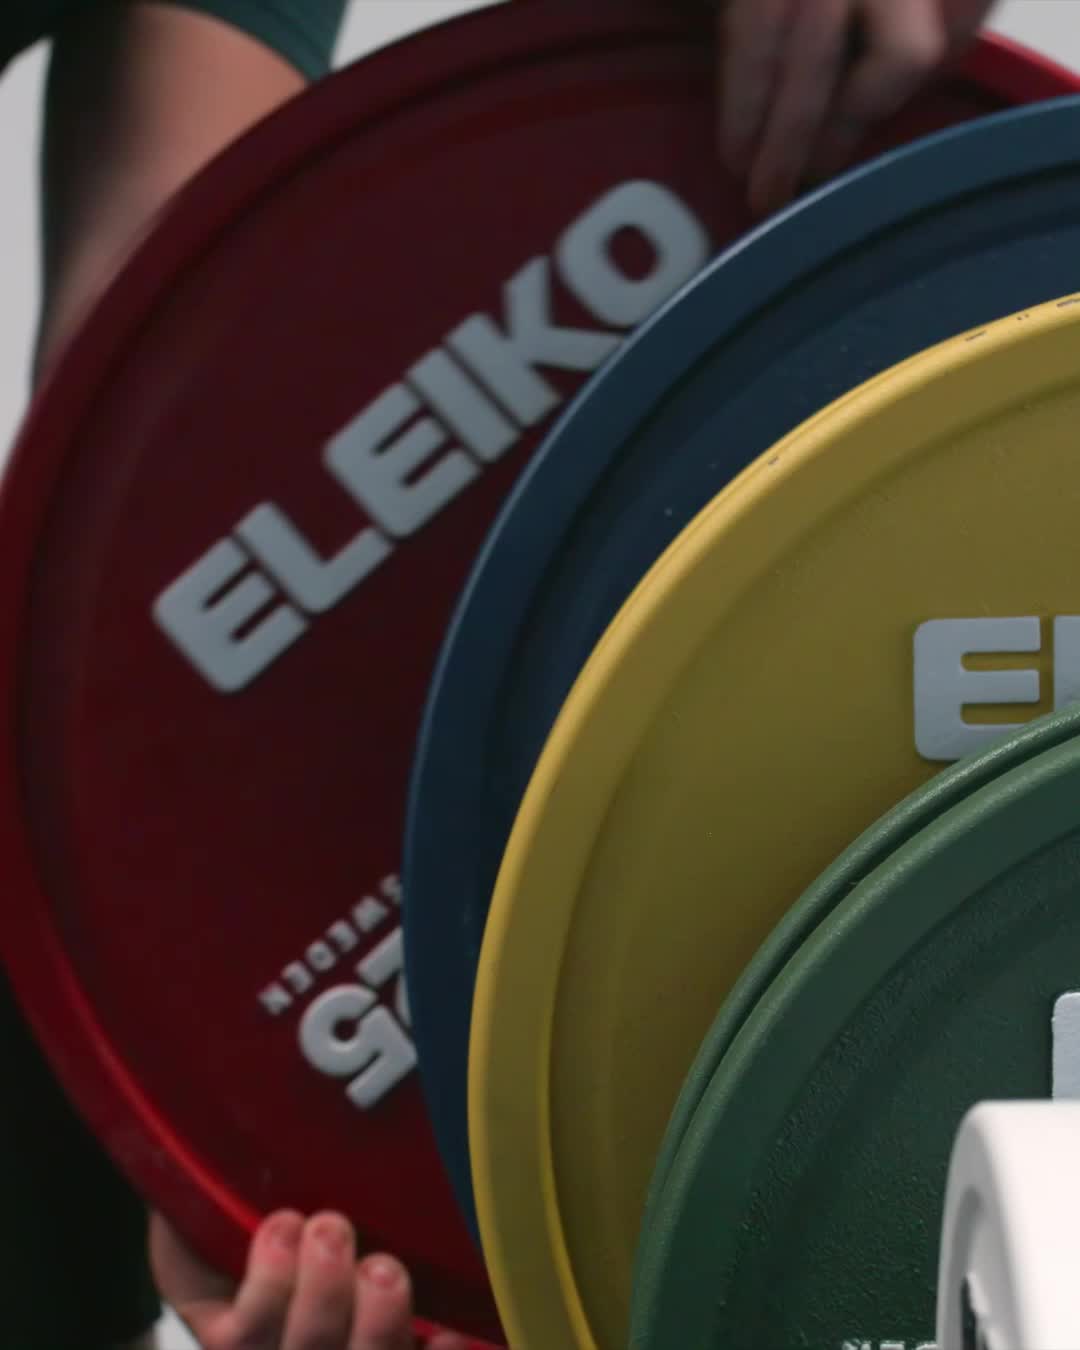 The Eleiko IPF Powerlifting Competition Bar 